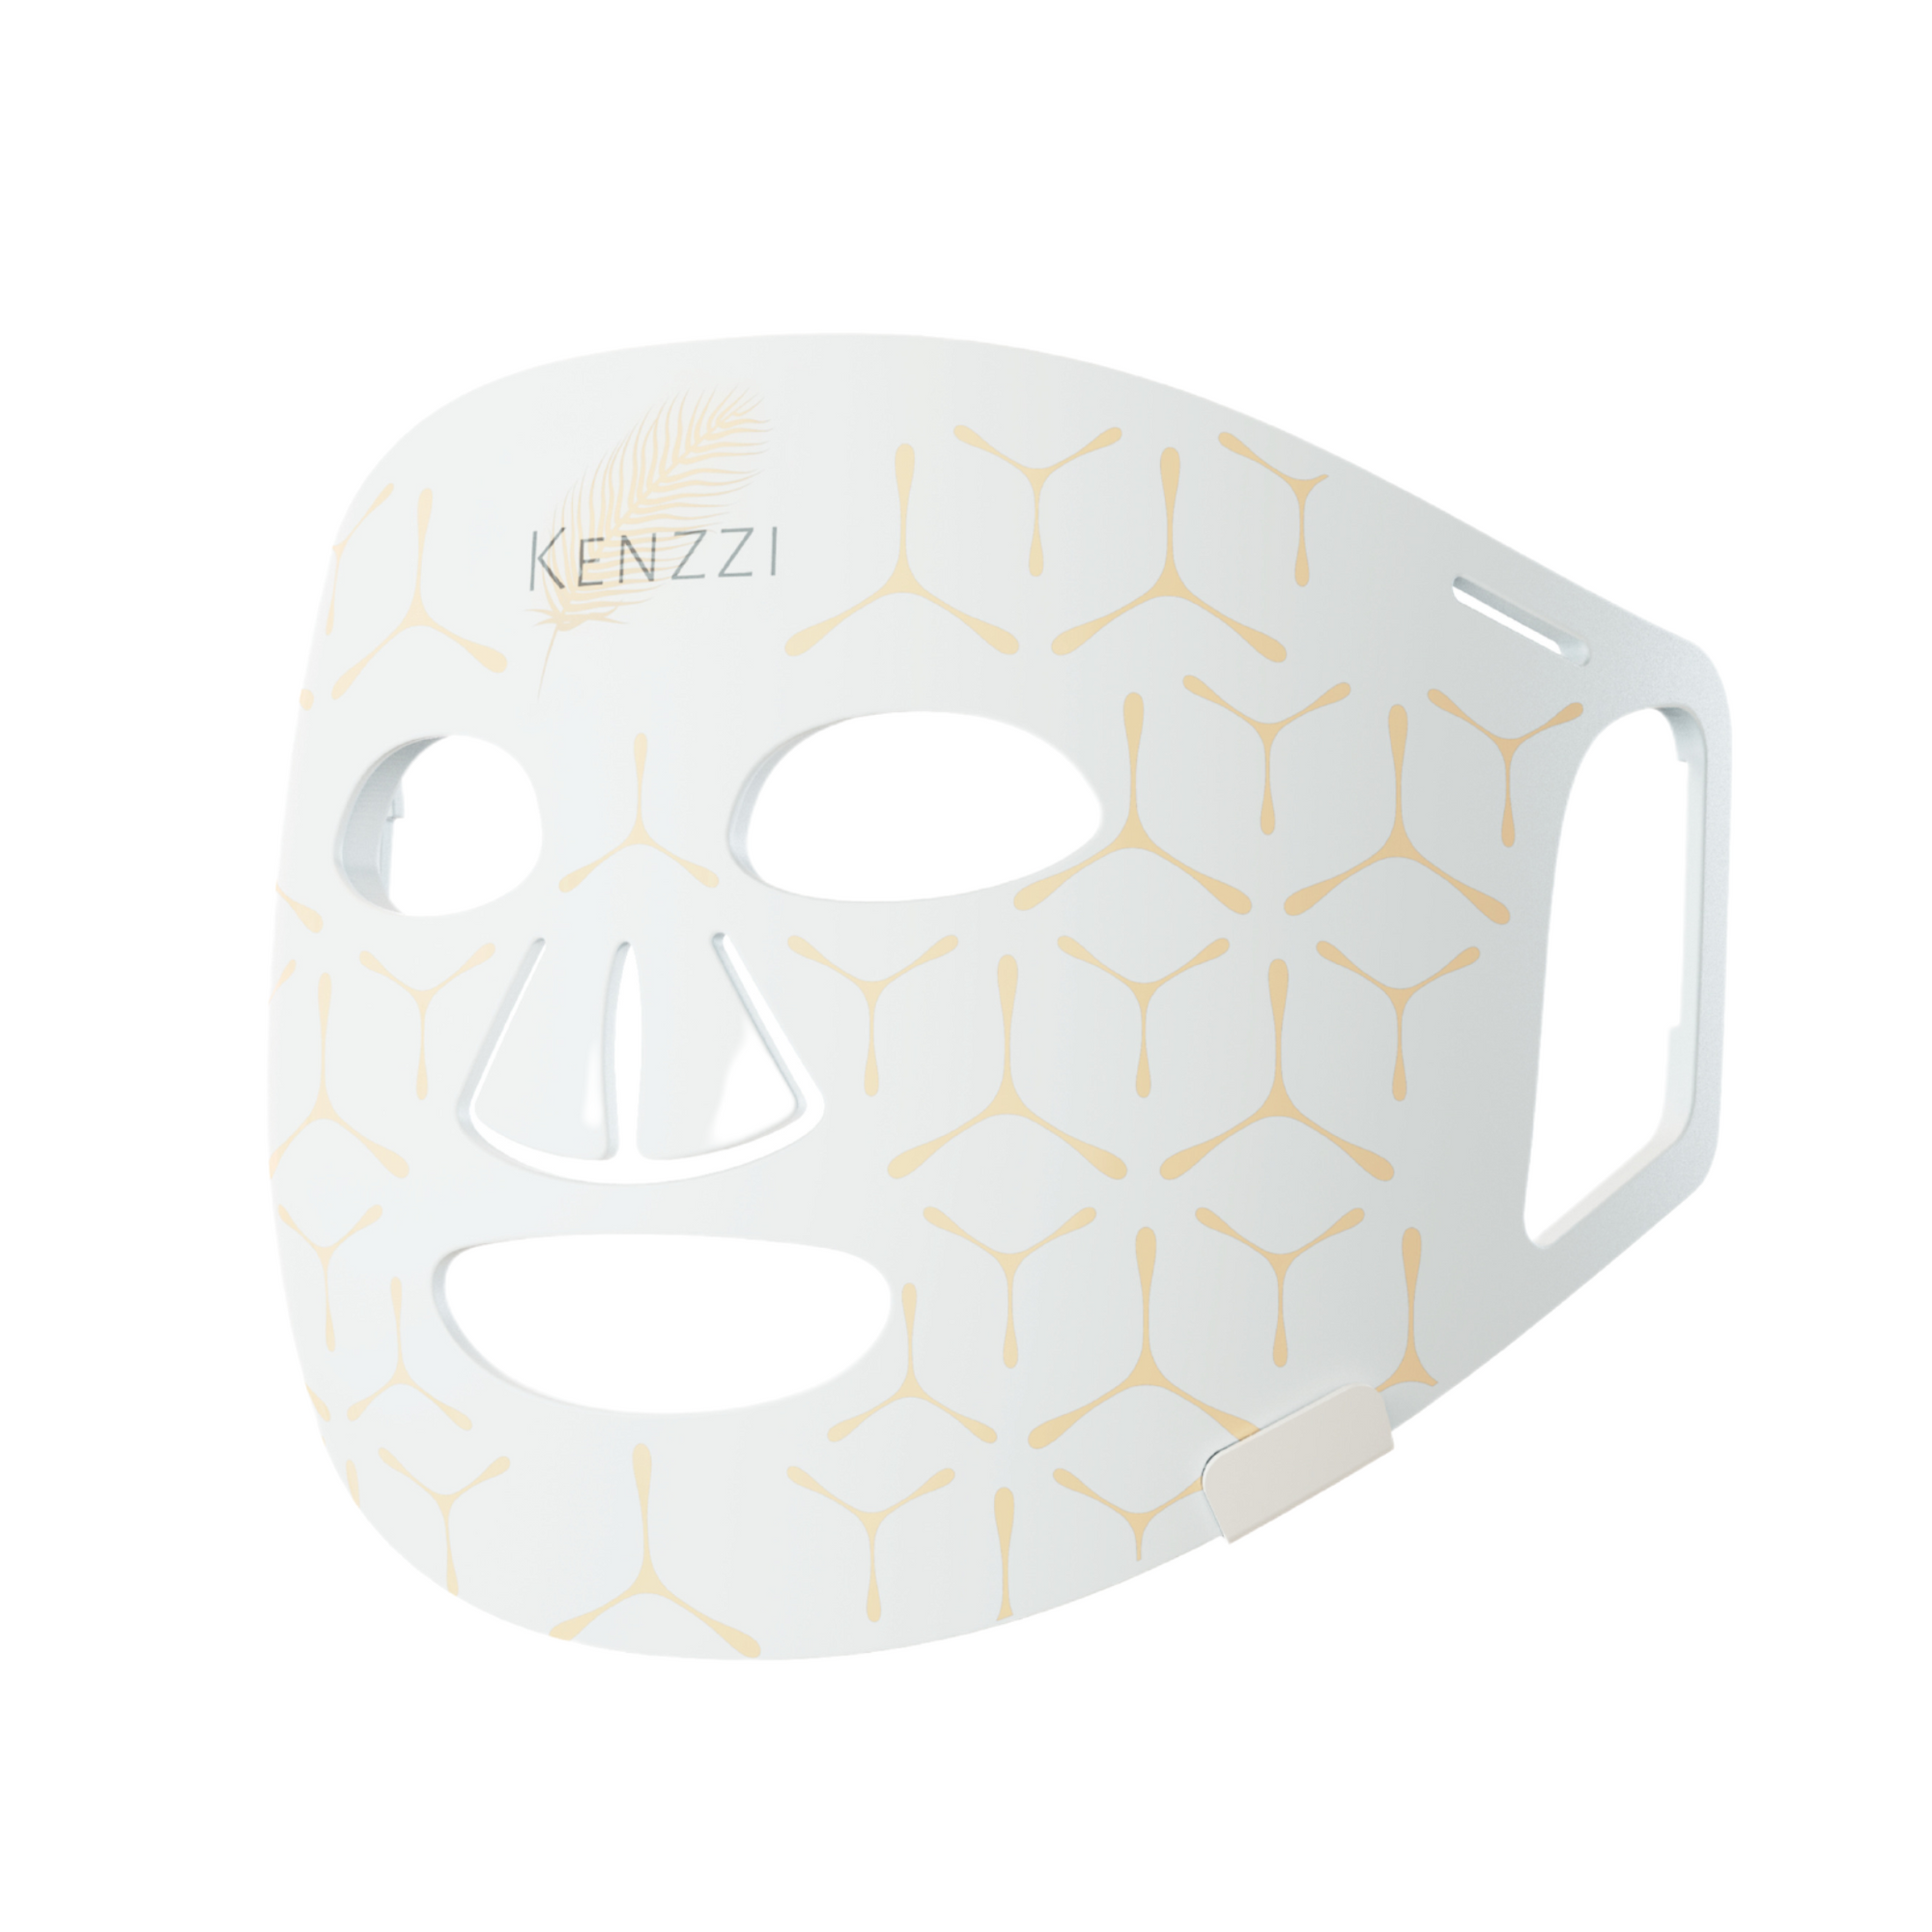 KENZZI LED Light Therapy Mask